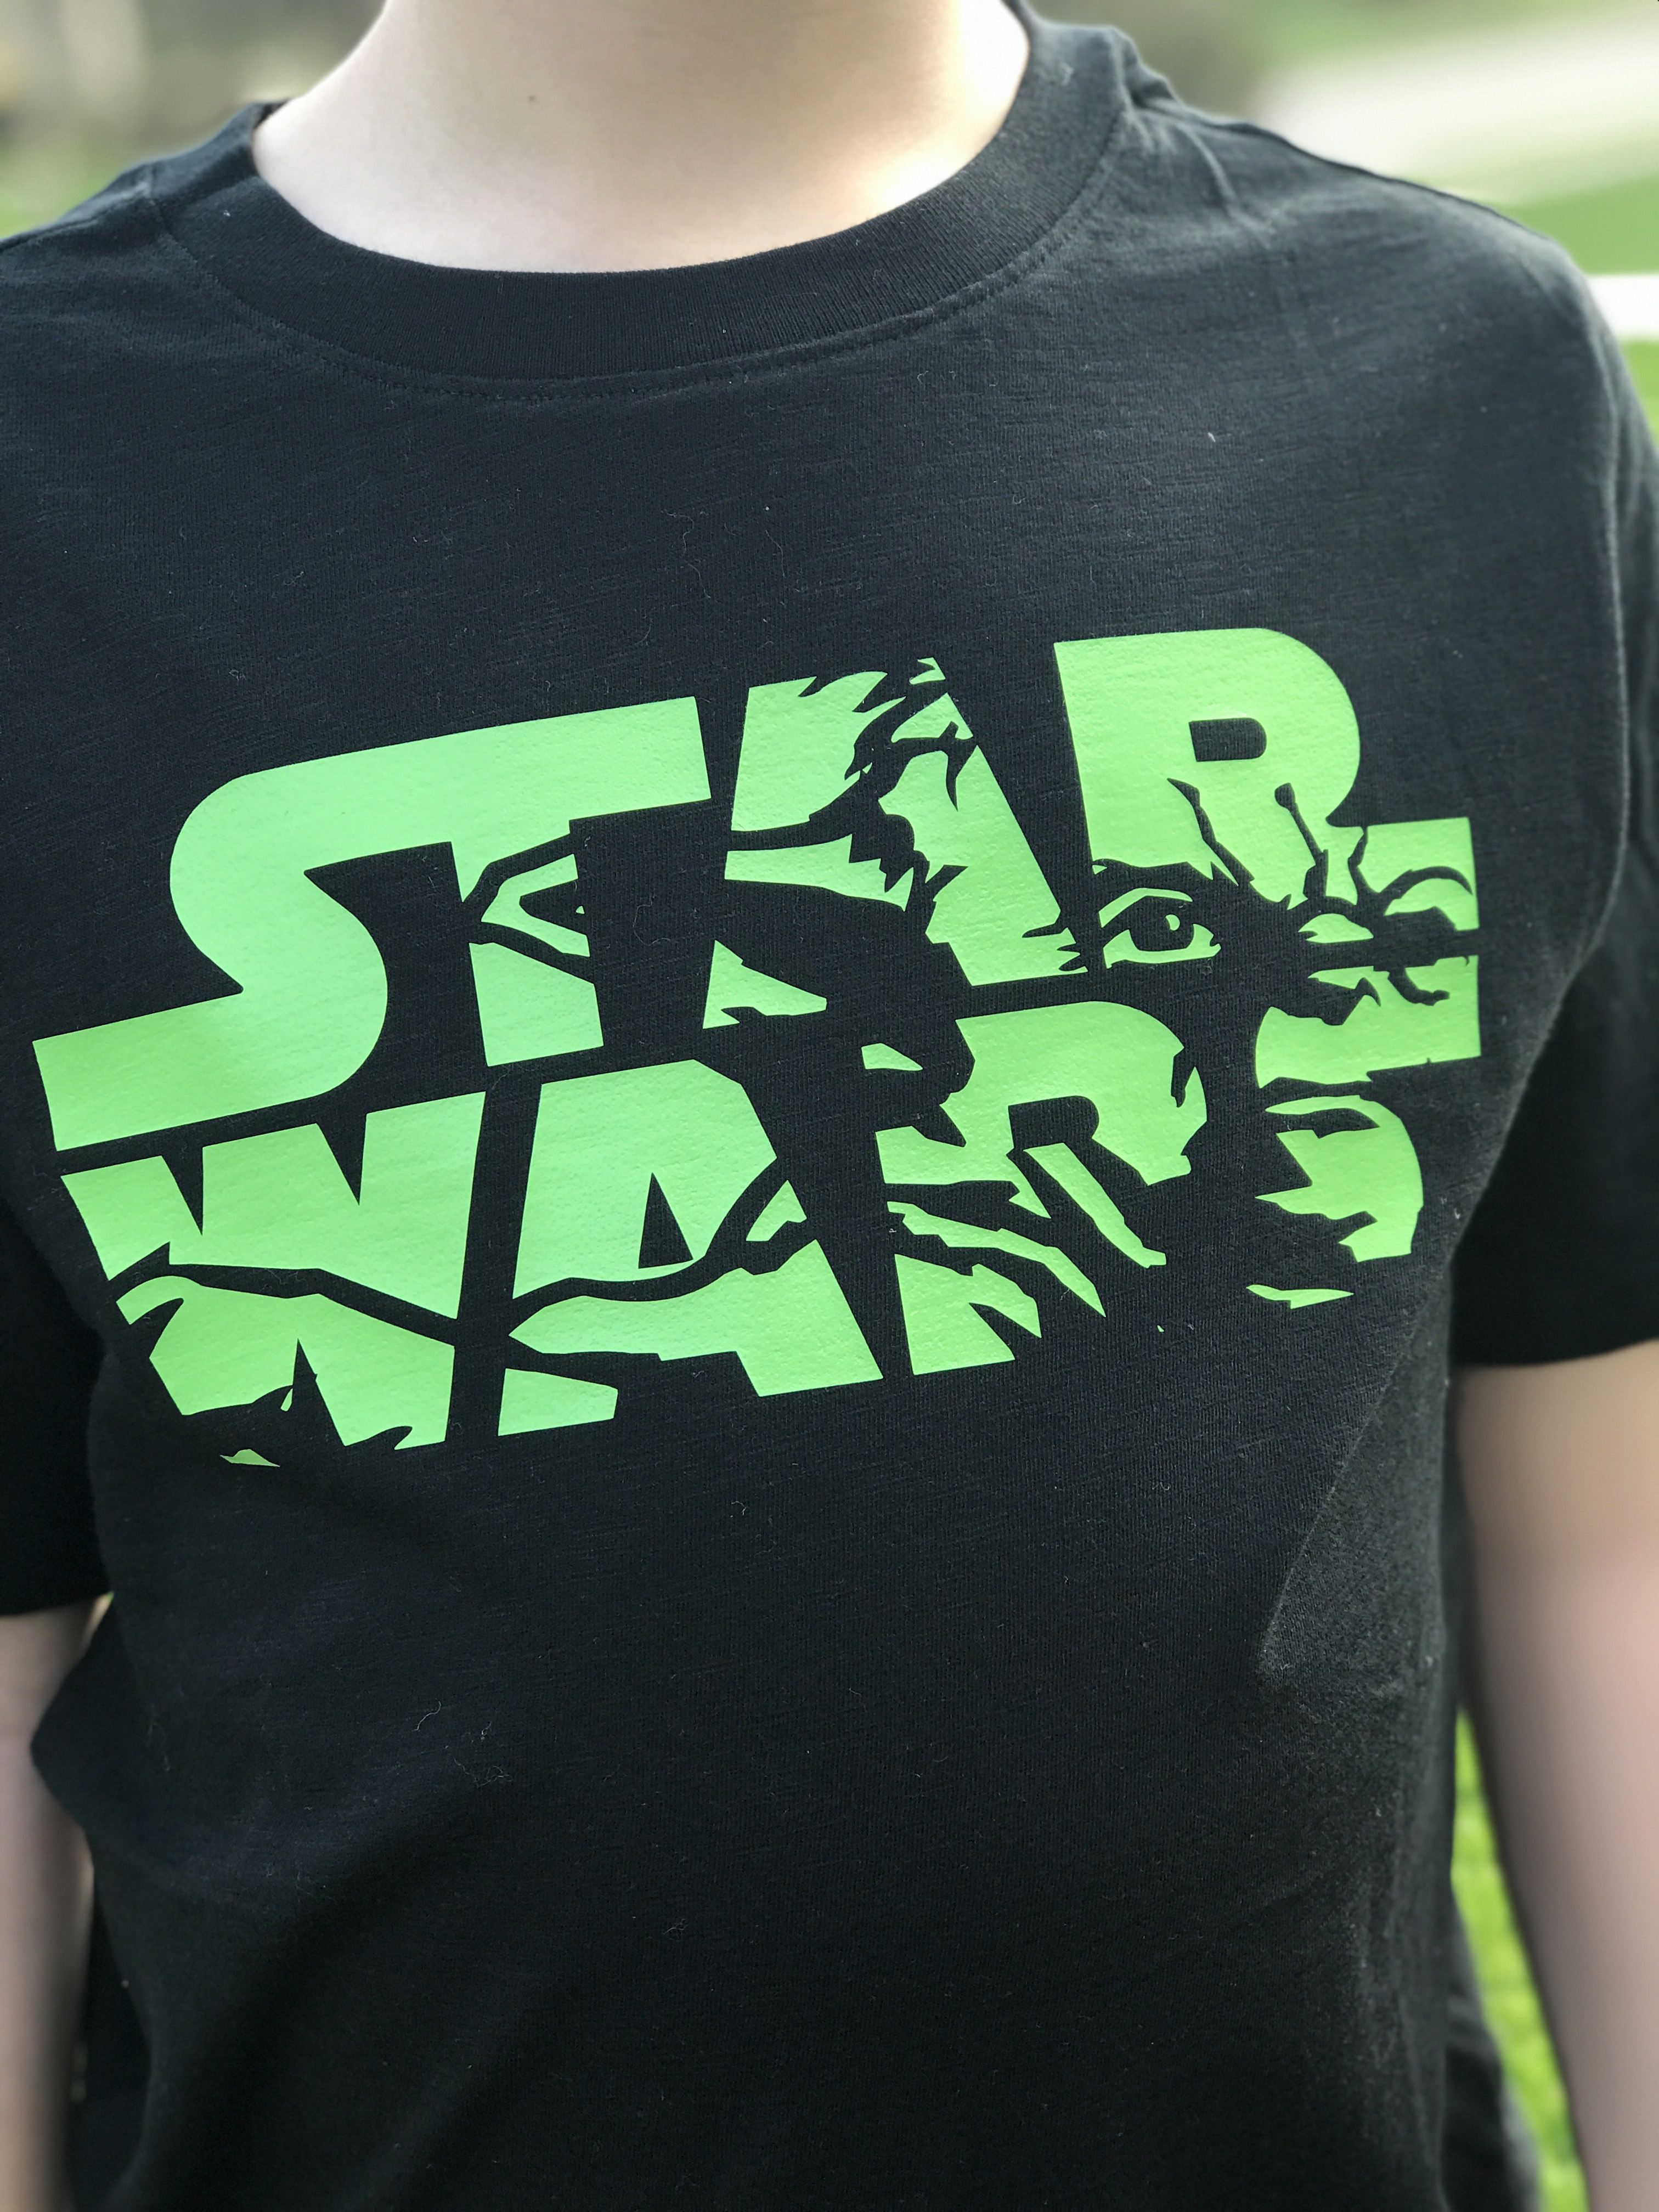 Make your Own DIY Star Wars Shirts with your Cricut